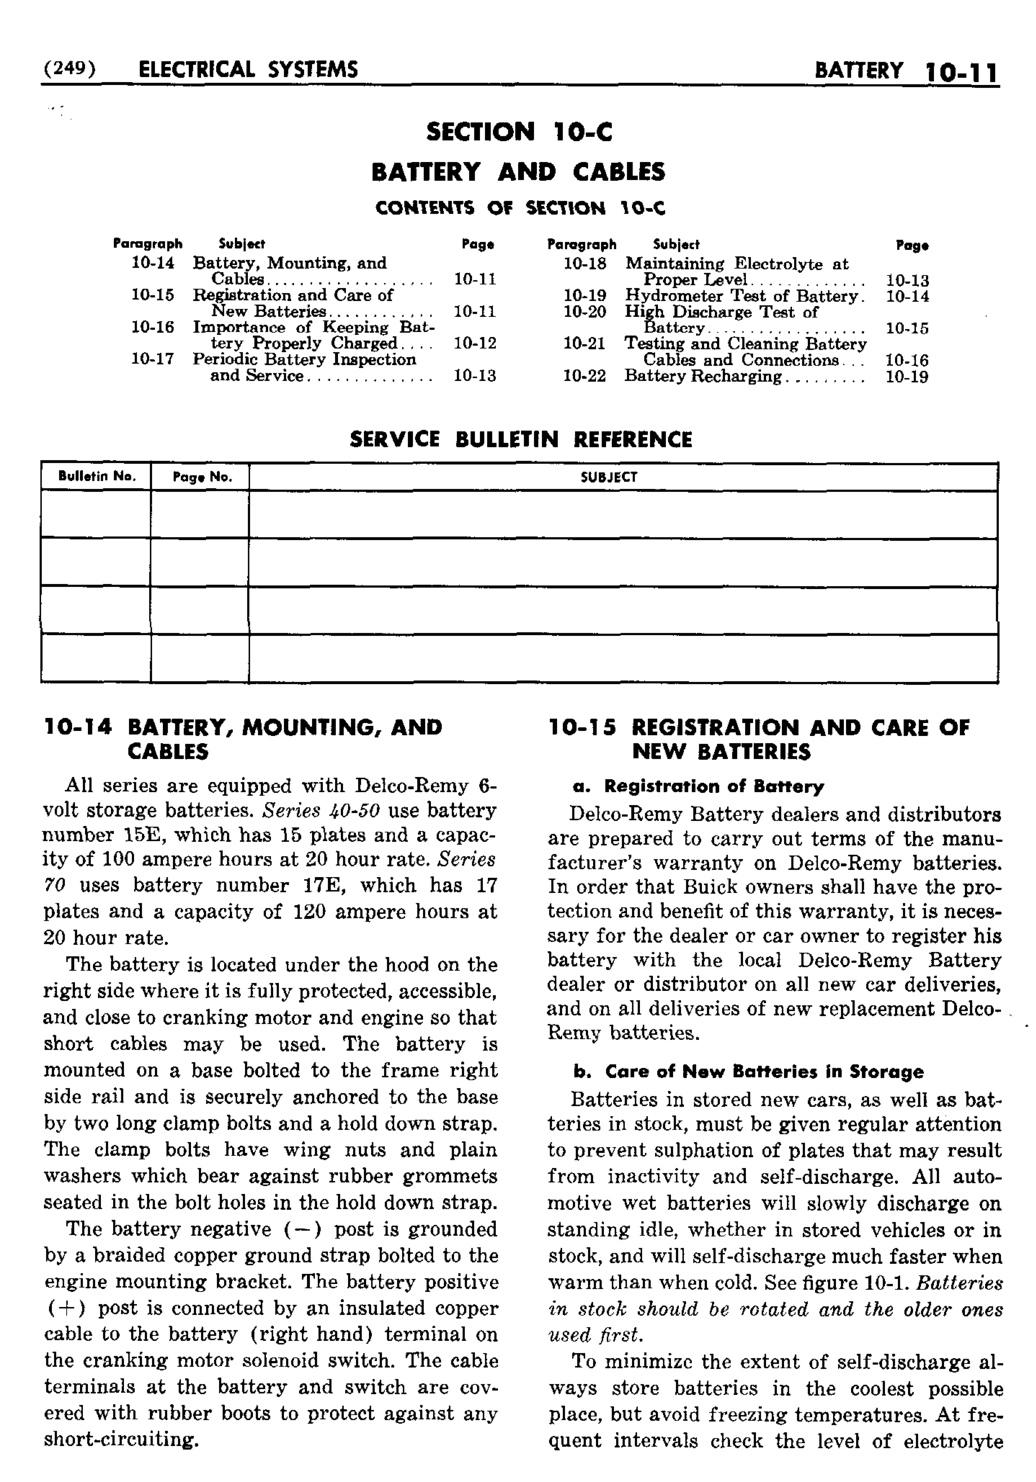 n_11 1950 Buick Shop Manual - Electrical Systems-011-011.jpg